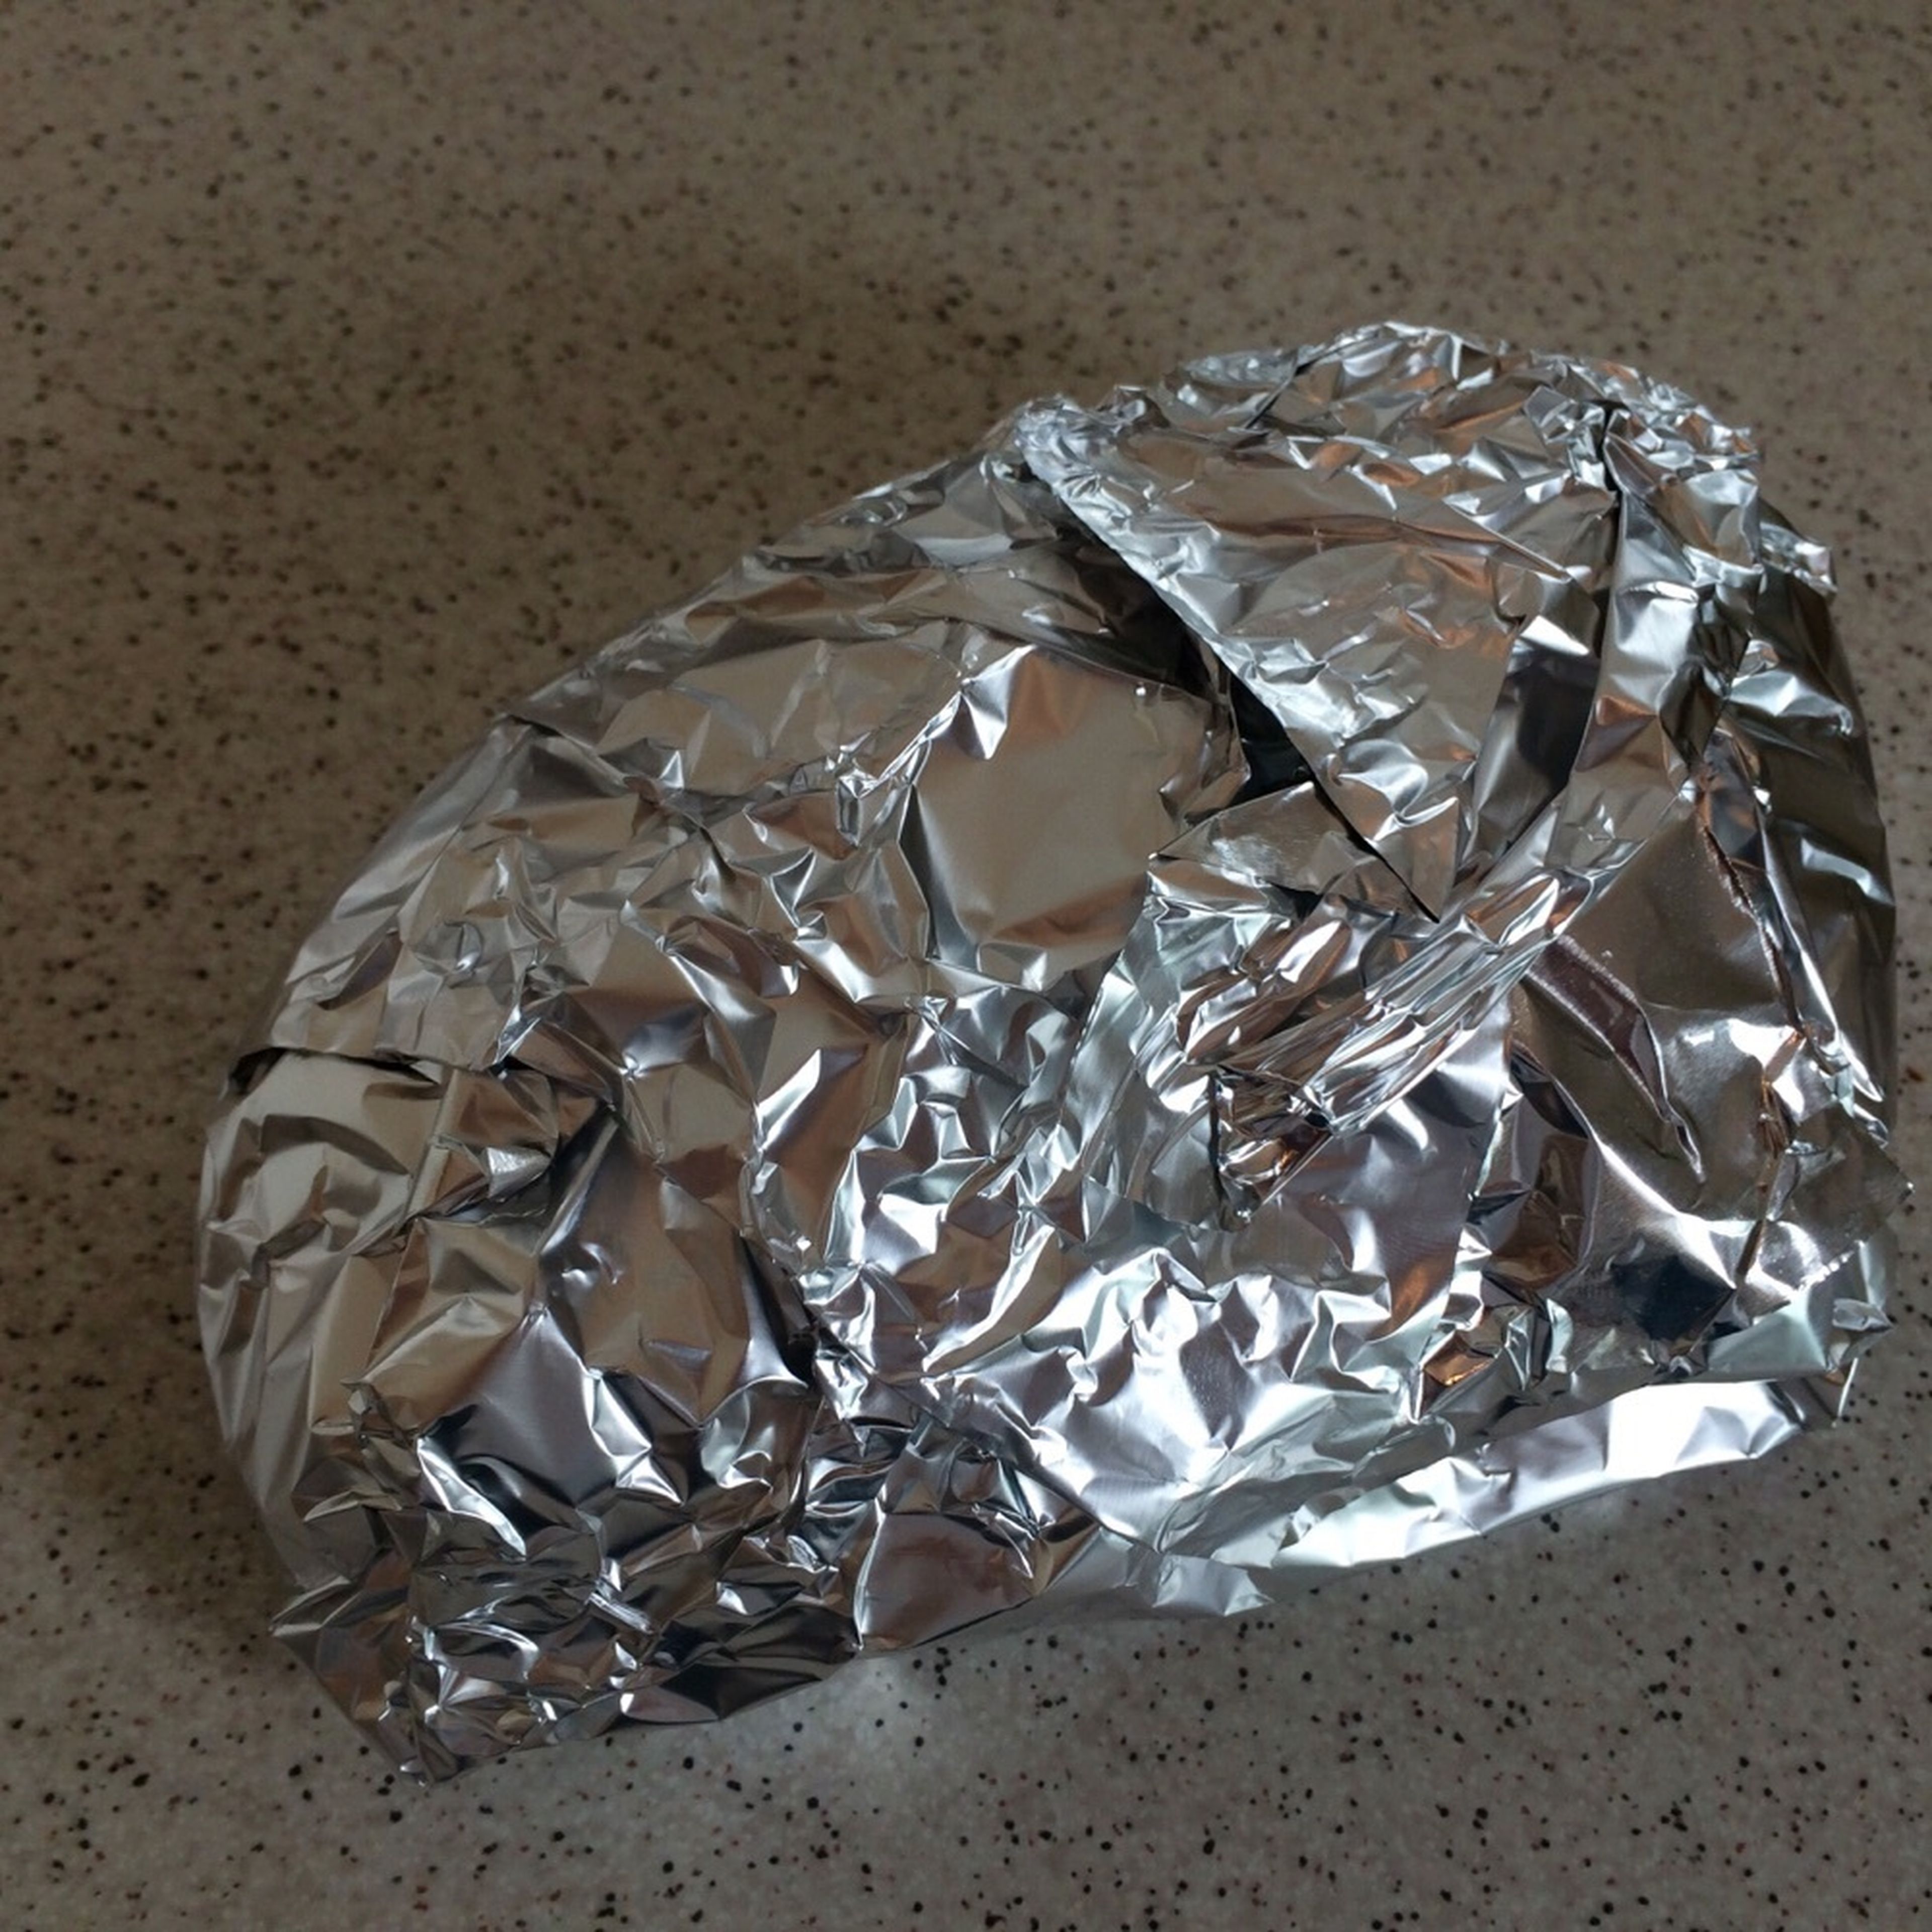 Remove duck breast from oven and rest for approx. 5 min. in aluminum foil. Slice and serve on top of the salad.